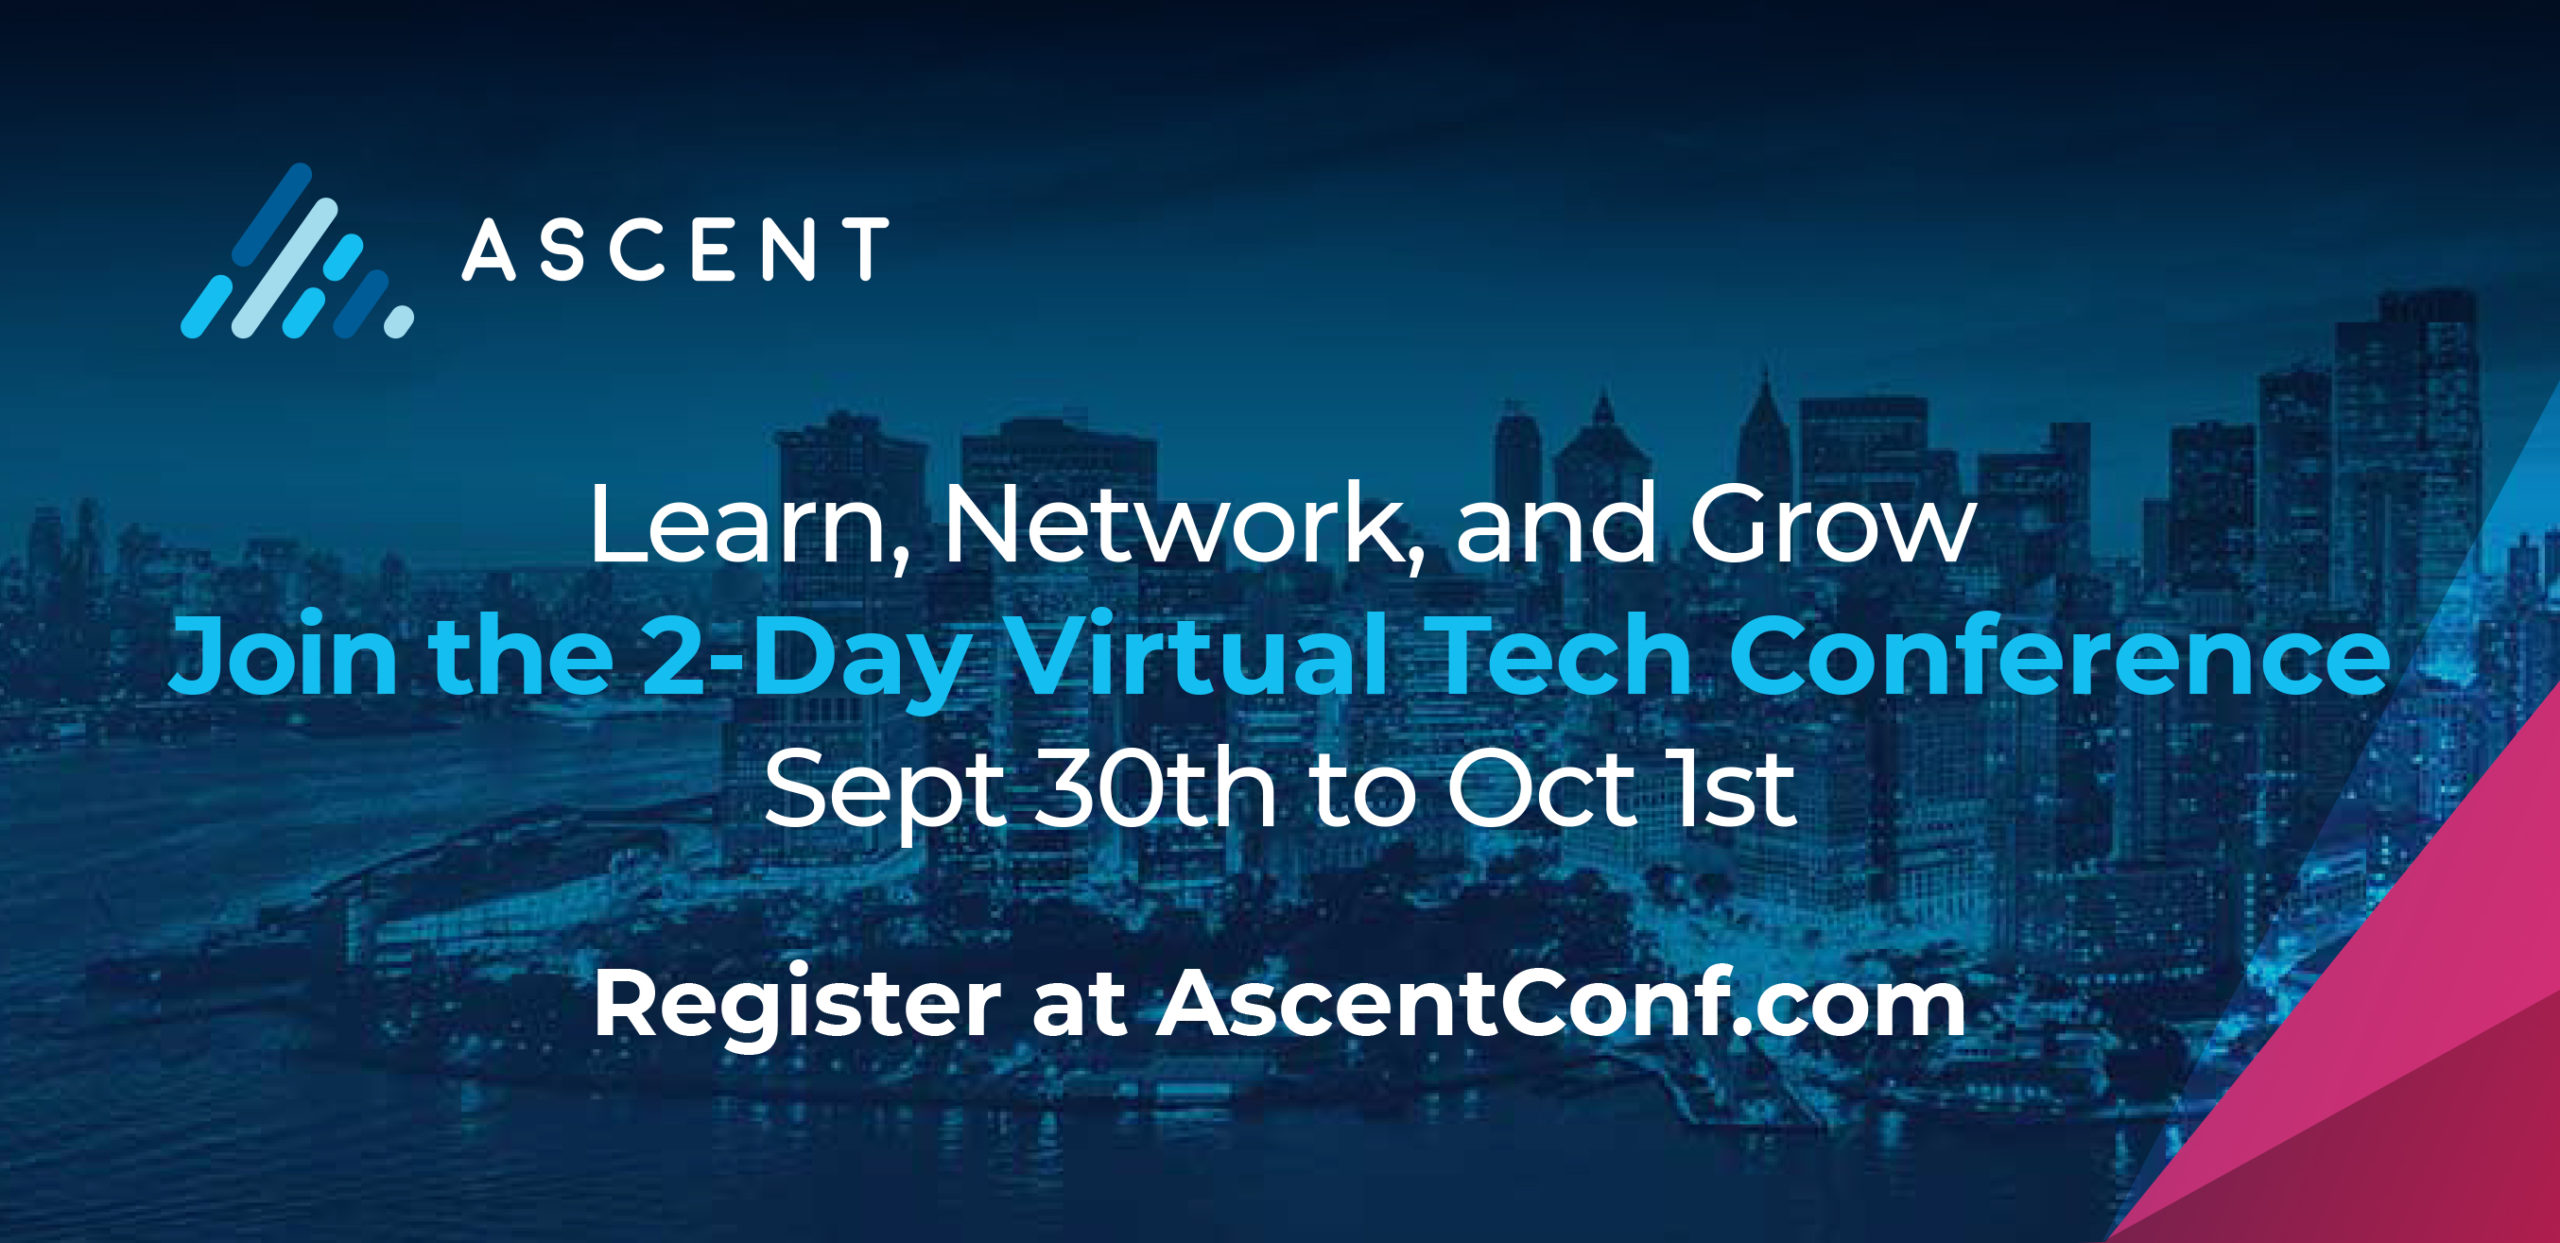 Ascent Conference Information: What Attendees Need to Know